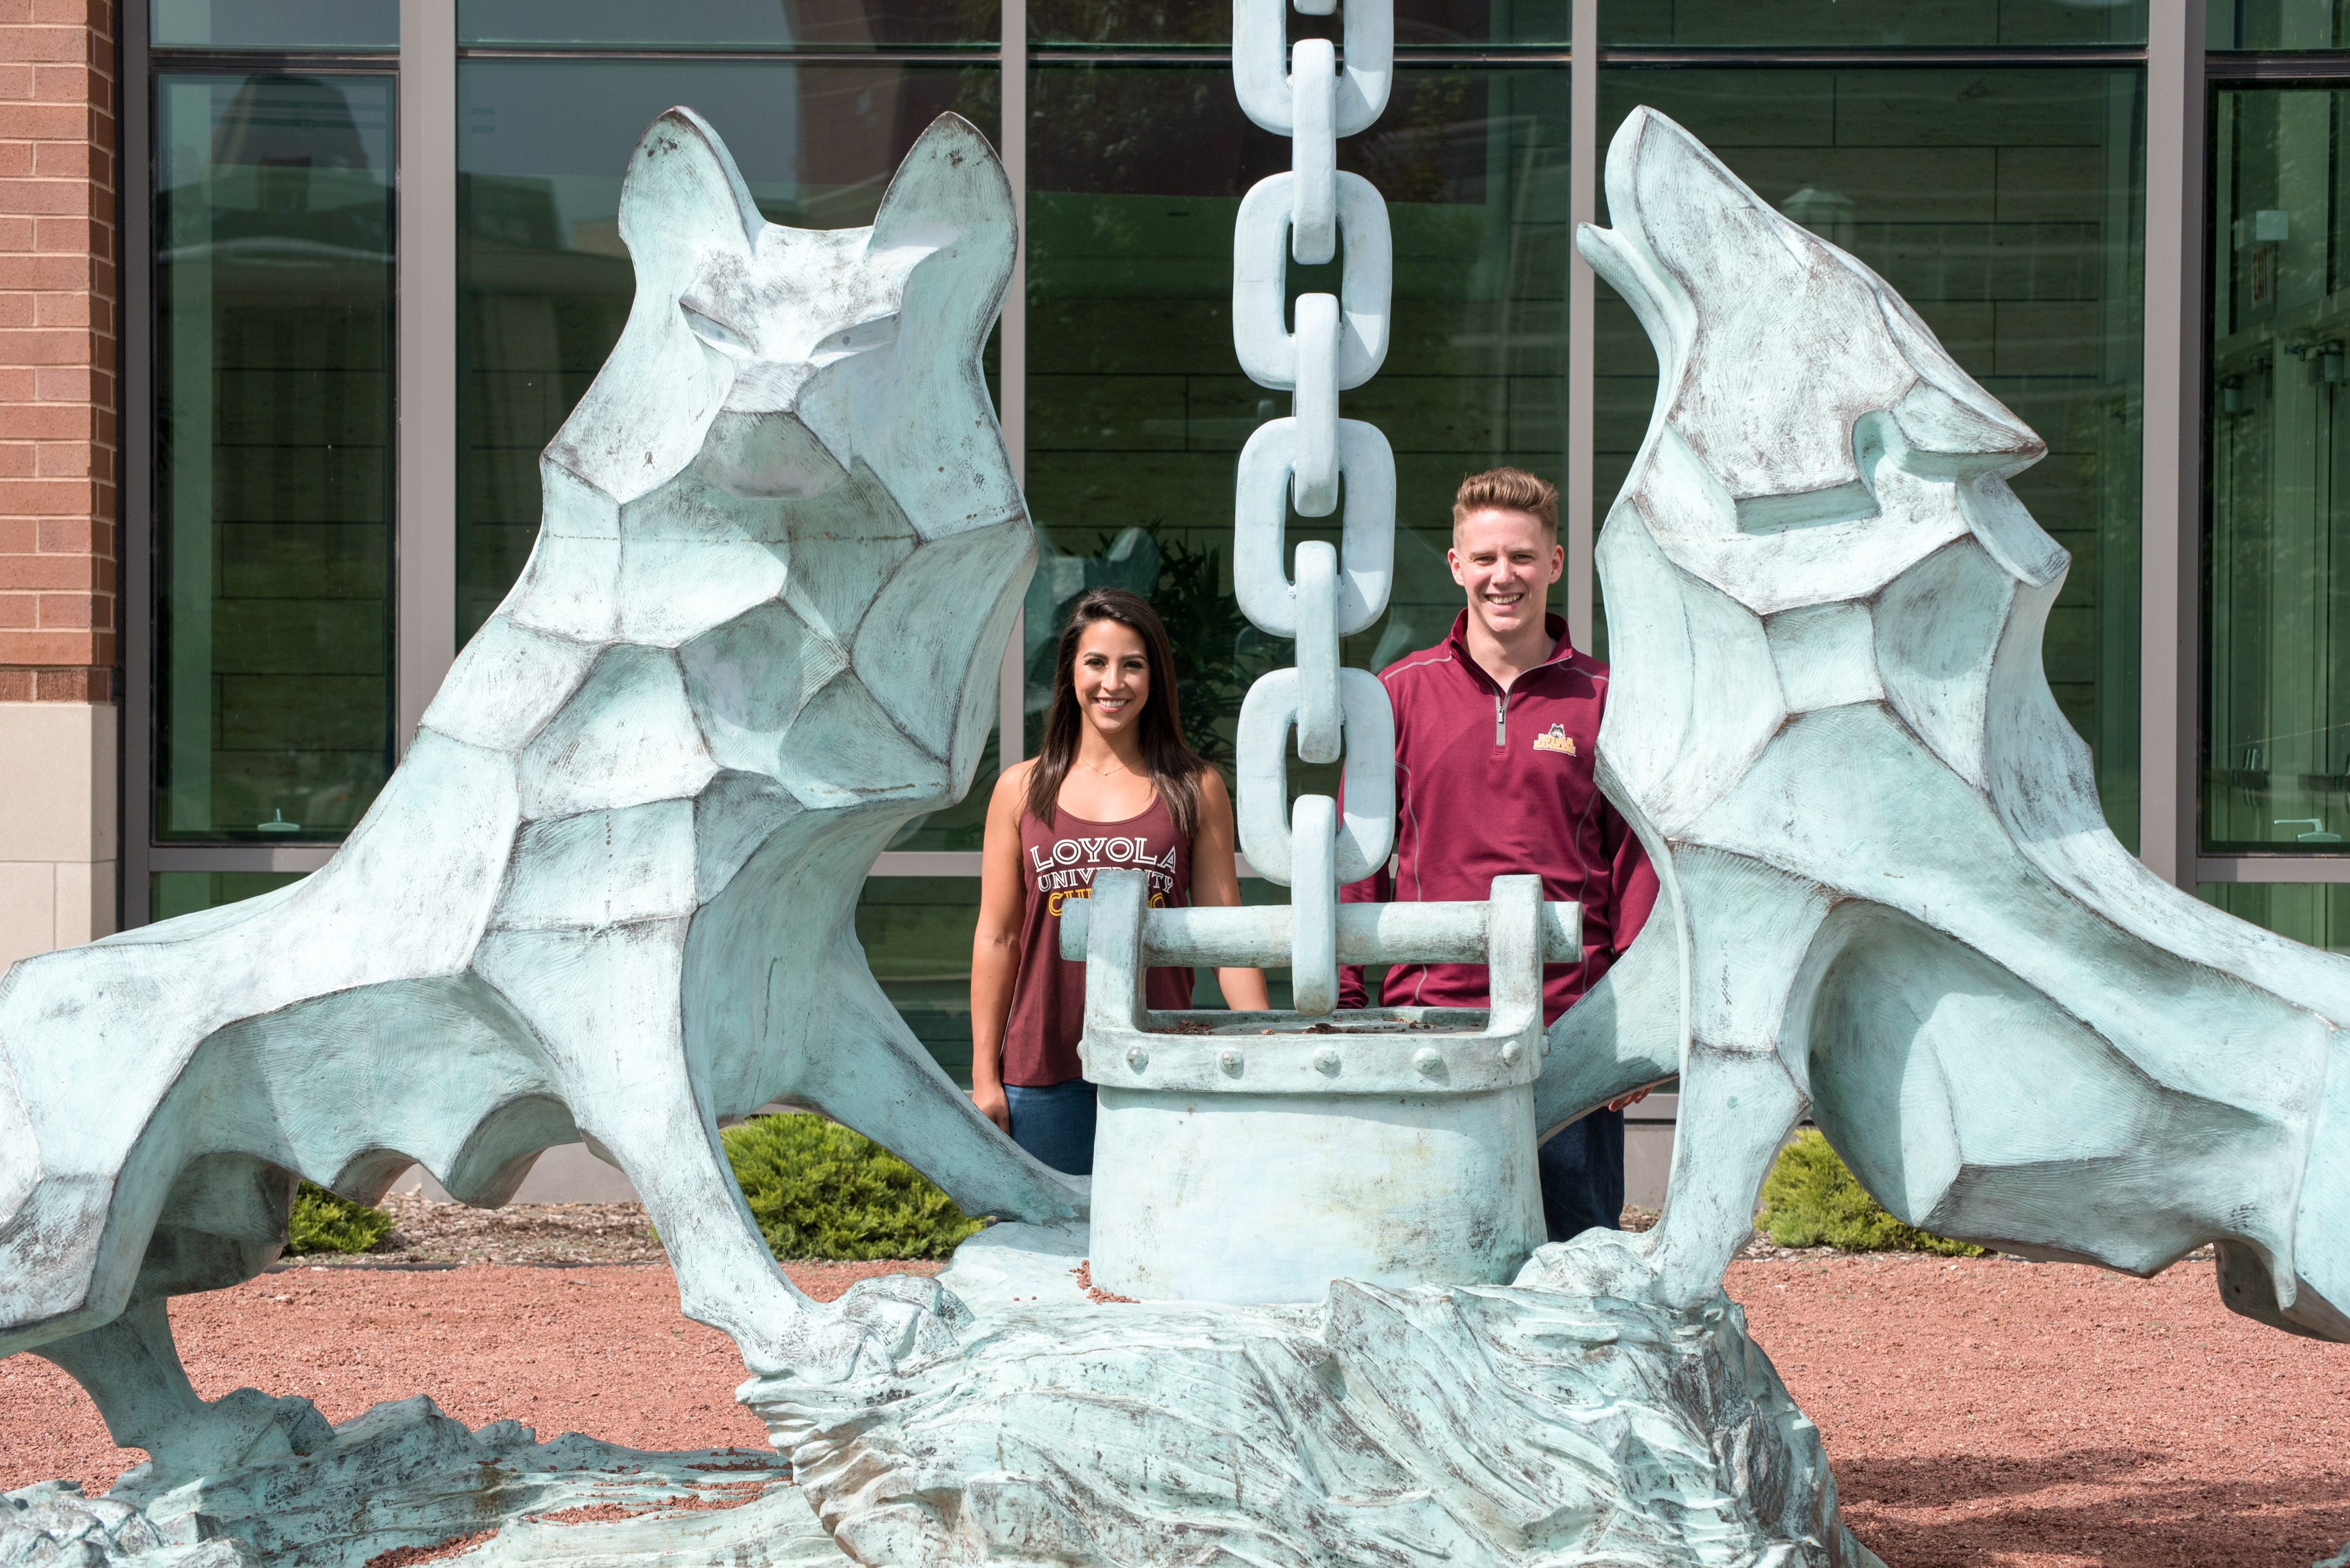 Lisa Lanigan, with husband Parker, at the Wolf and Kettle statue on the Lake Shore Campus